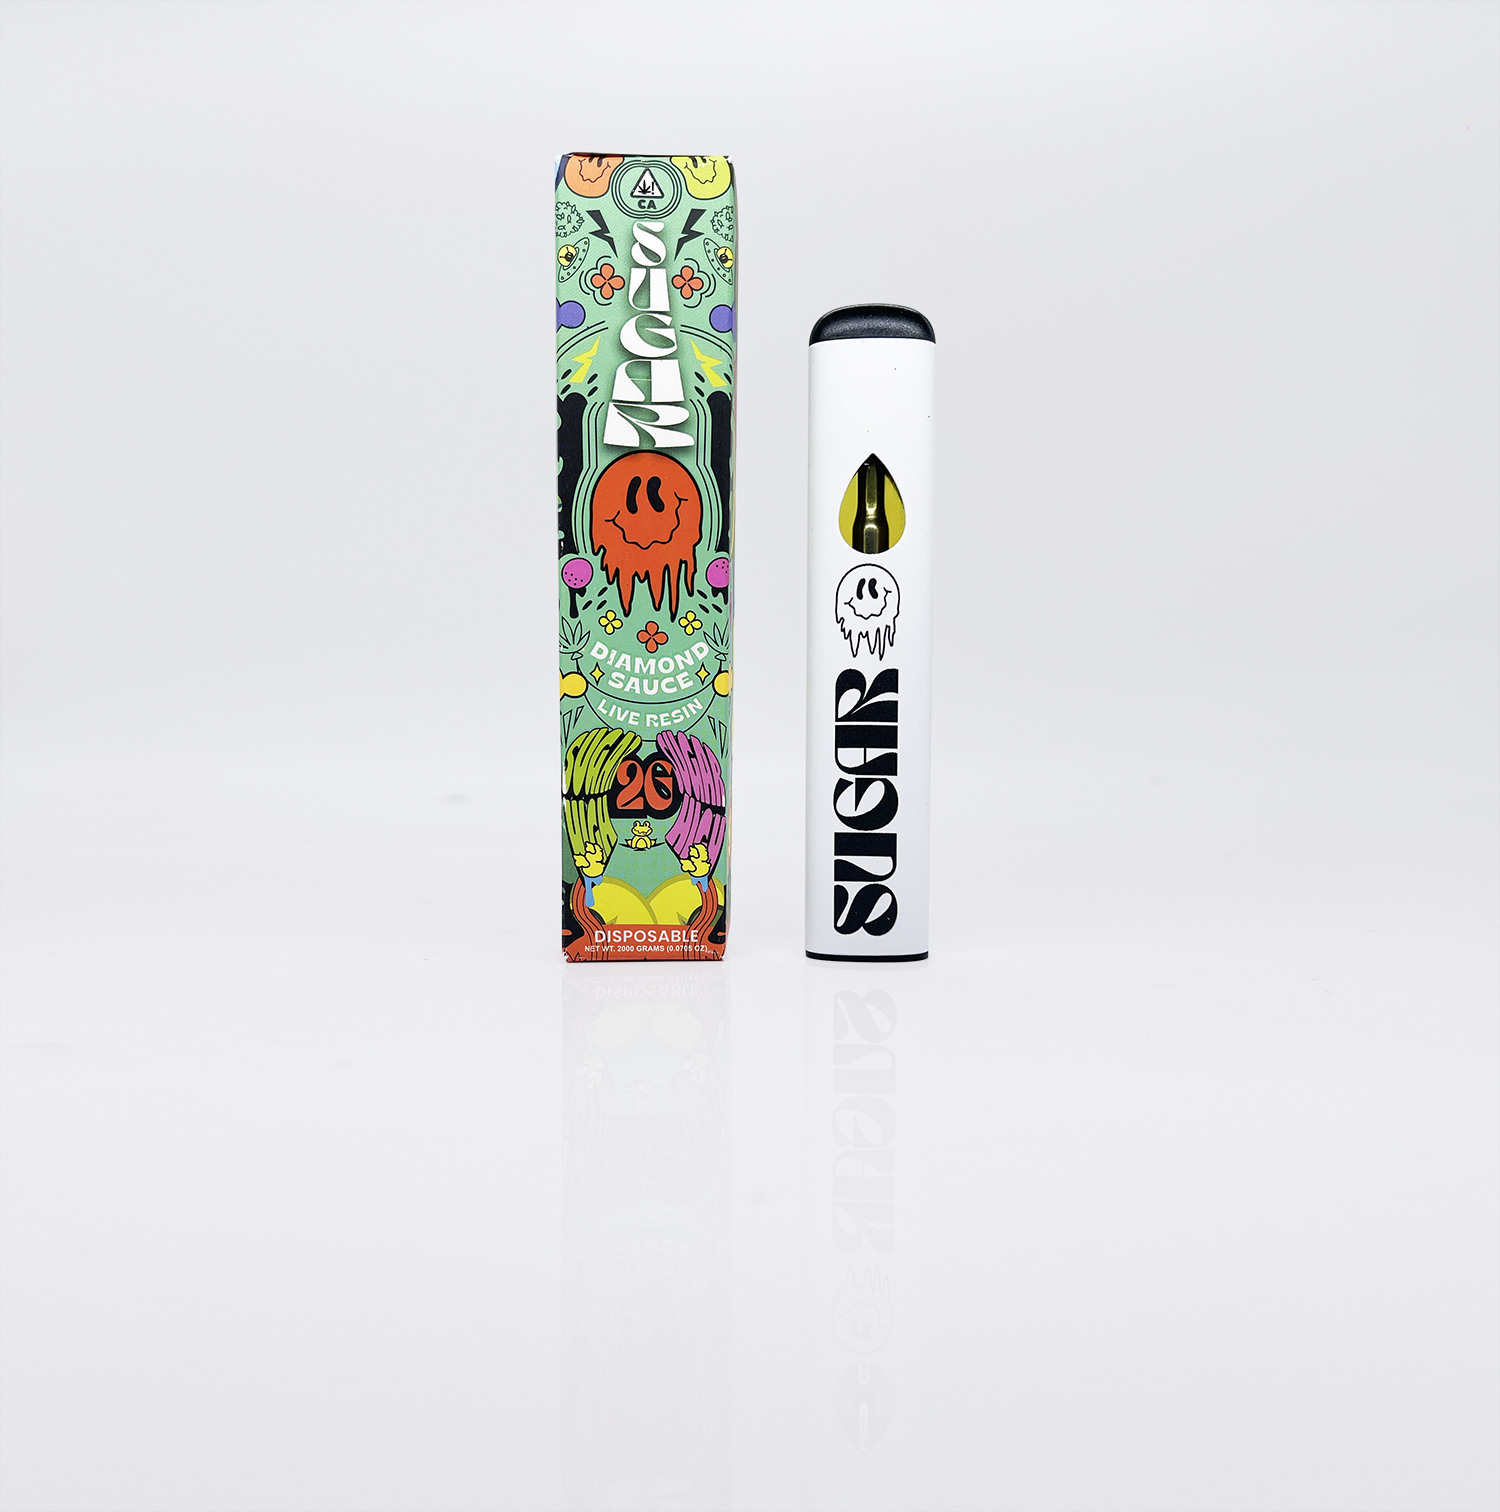 Sugar Extrax 2g Live Resin Diamond Disposable Vape Pen *out of stock* -  District Connect - Washington DC i71 Weed Delivery